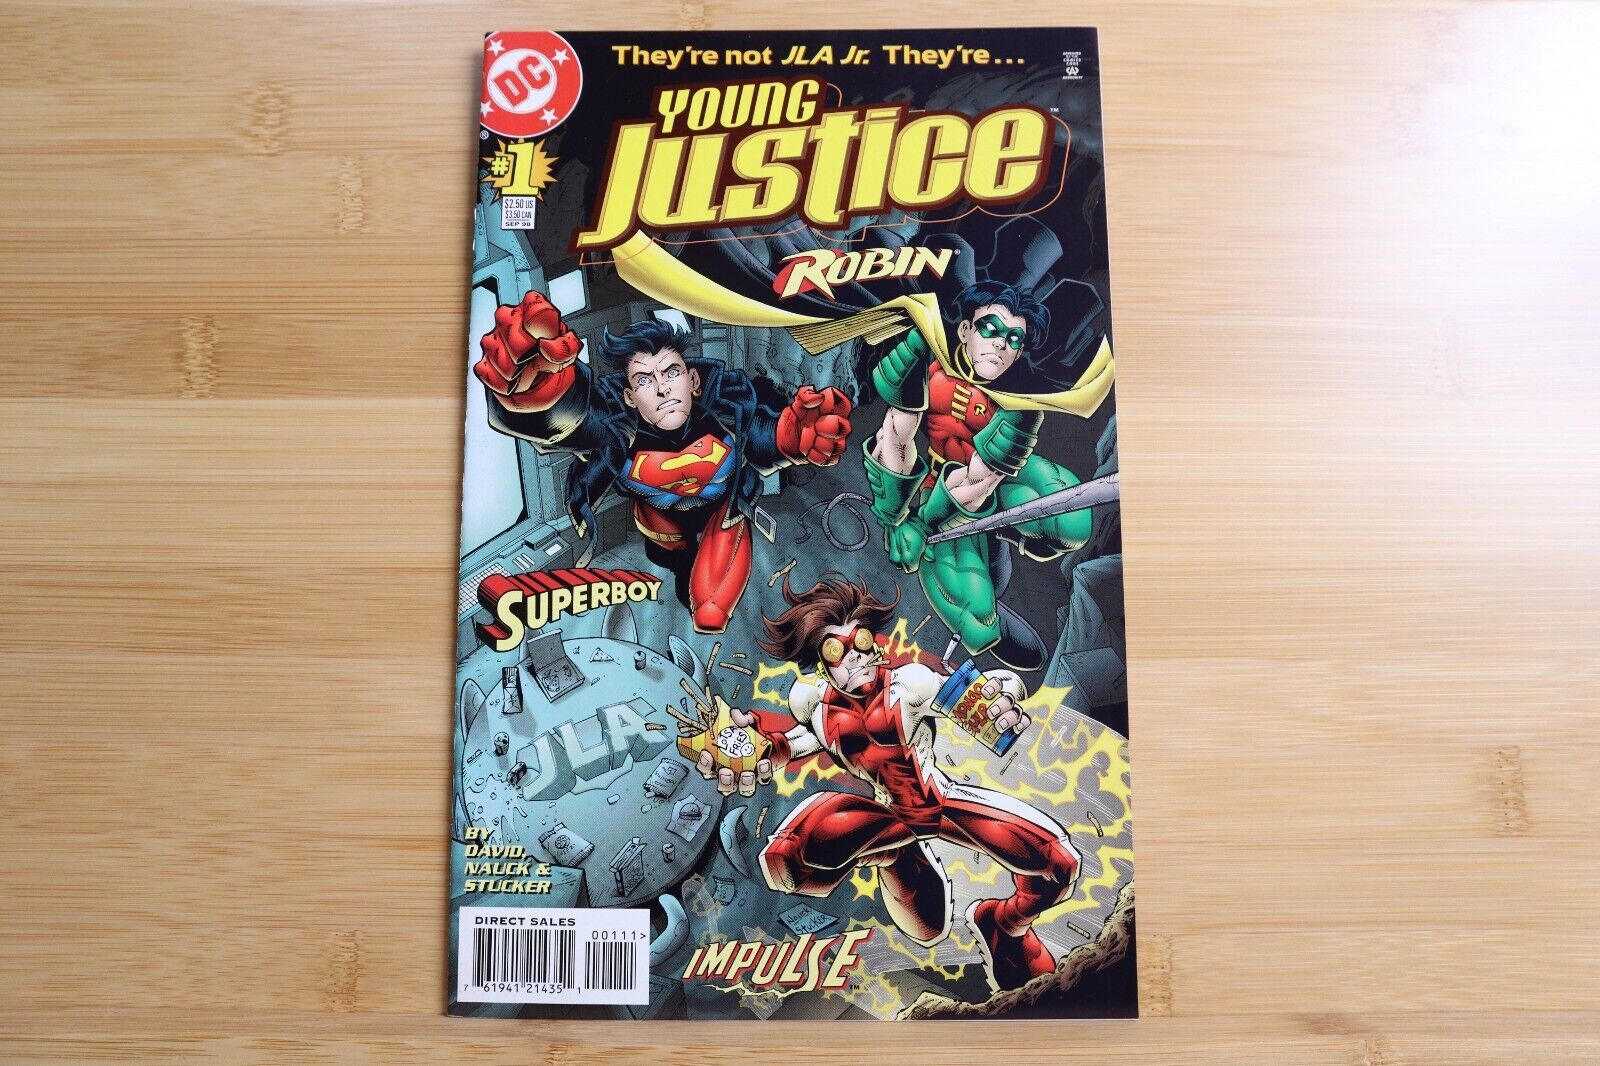 Young Justice # 1, 1st Print DC Comic Robin Superboy Impulse NM